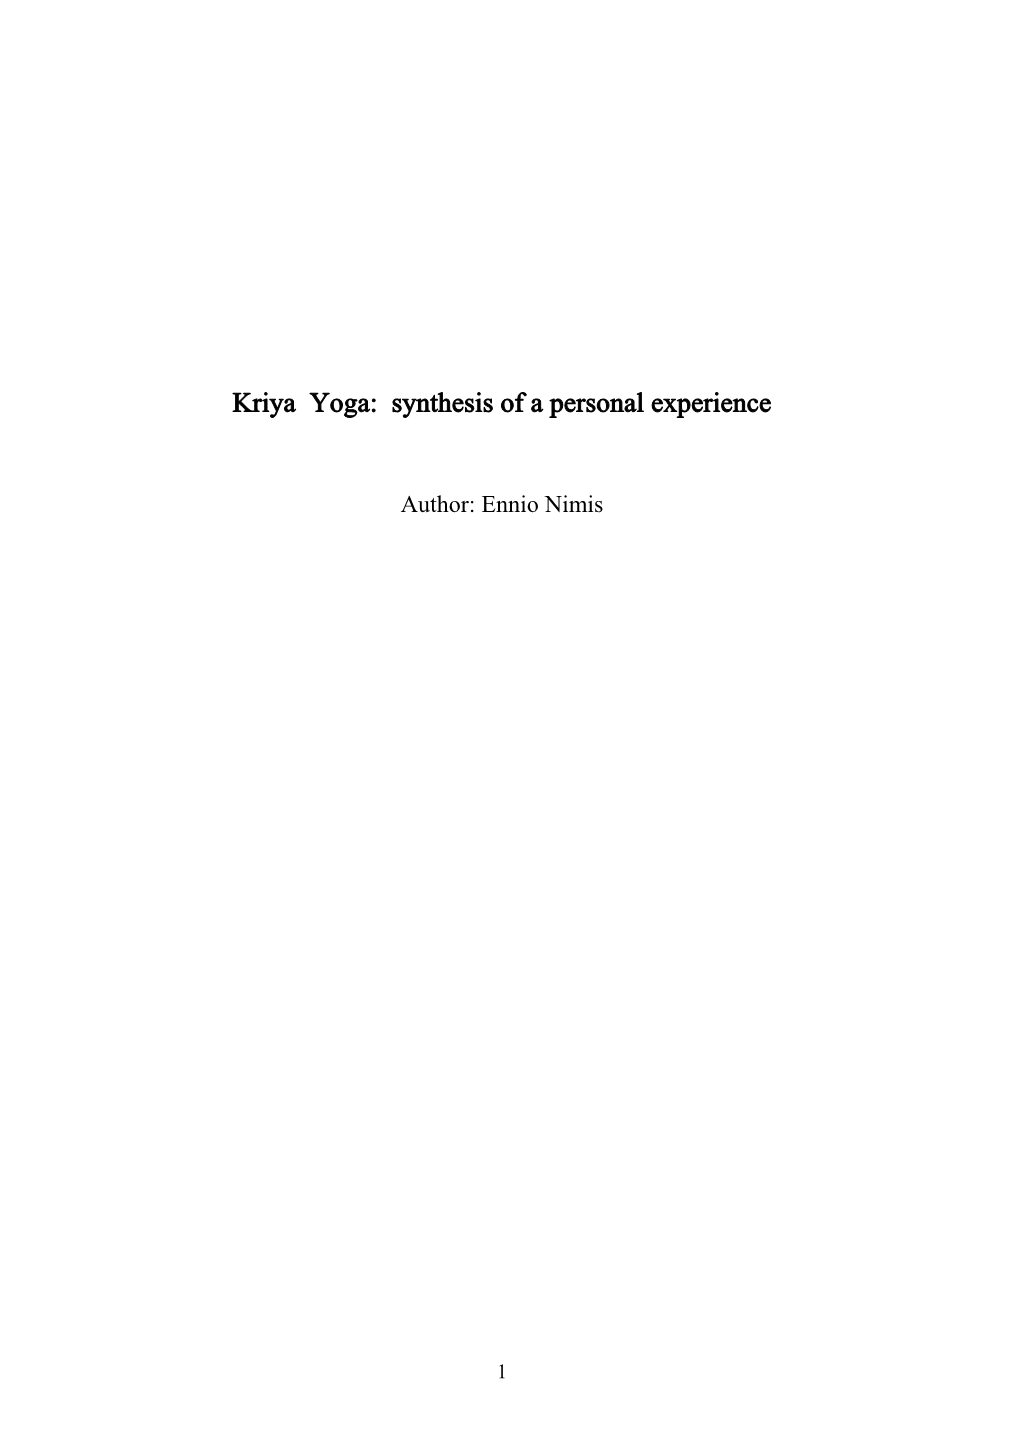 Kriya Yoga: Synthesis of a Personal Experience